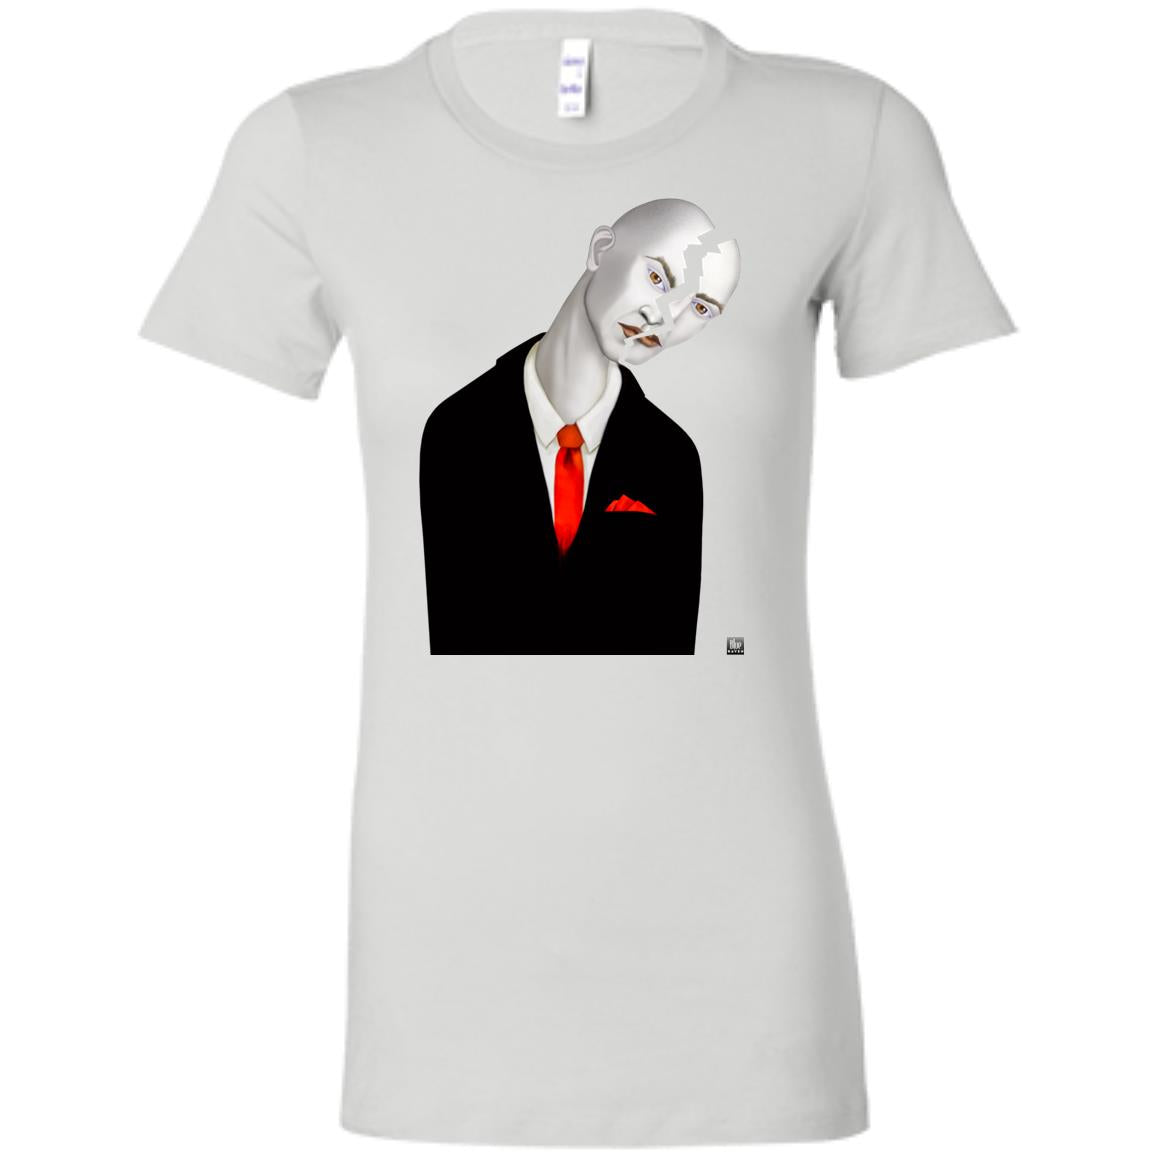 CRACKED UP - Women's Fitted T-Shirt